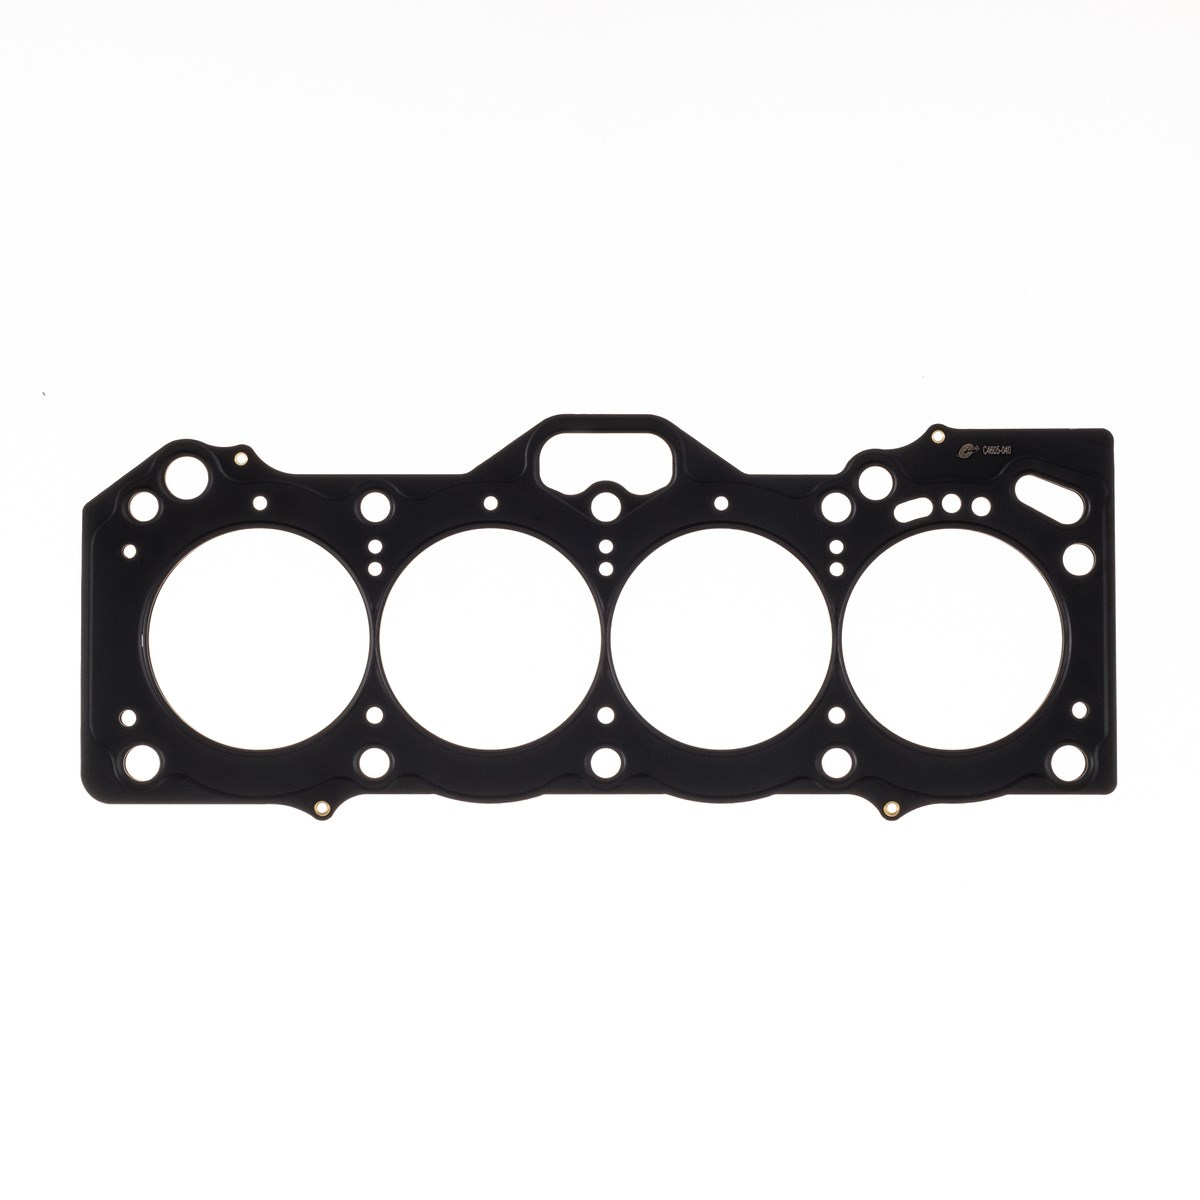 Cylinder Head Gasket Toyota 4A-GE .098" MLS , 83mm Bore, 20-Valve Cometic C4605-098